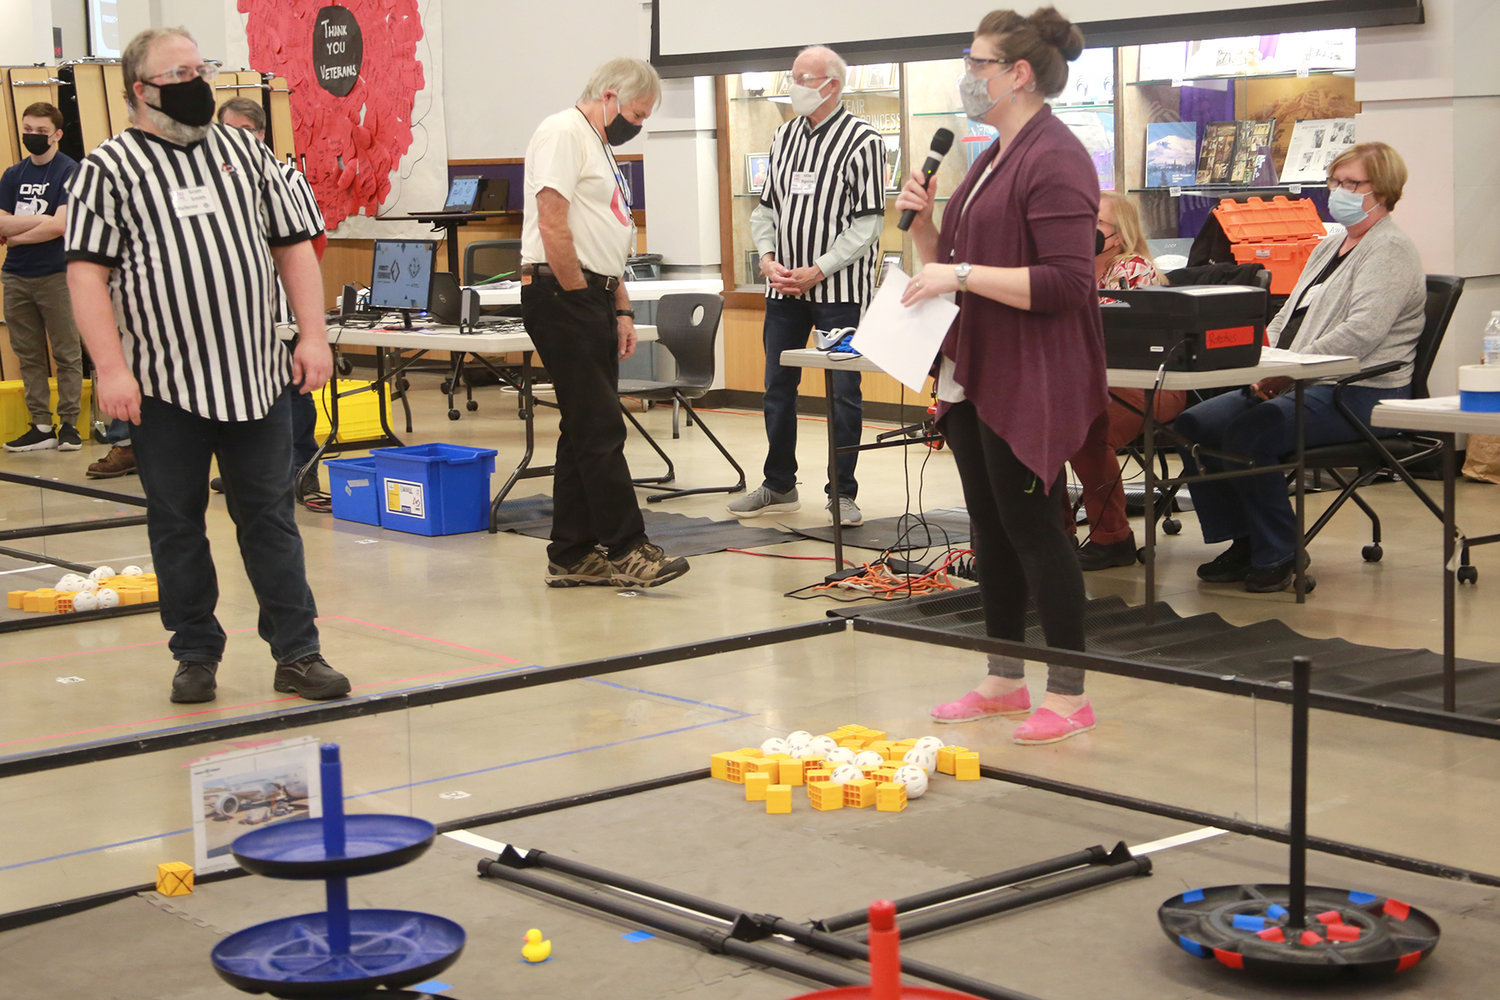 Jenny Kassil, shown holding a microphone, head coach of the Robotics team for North Thurston High School, speaks at the Nov. 13, 2021 competition.